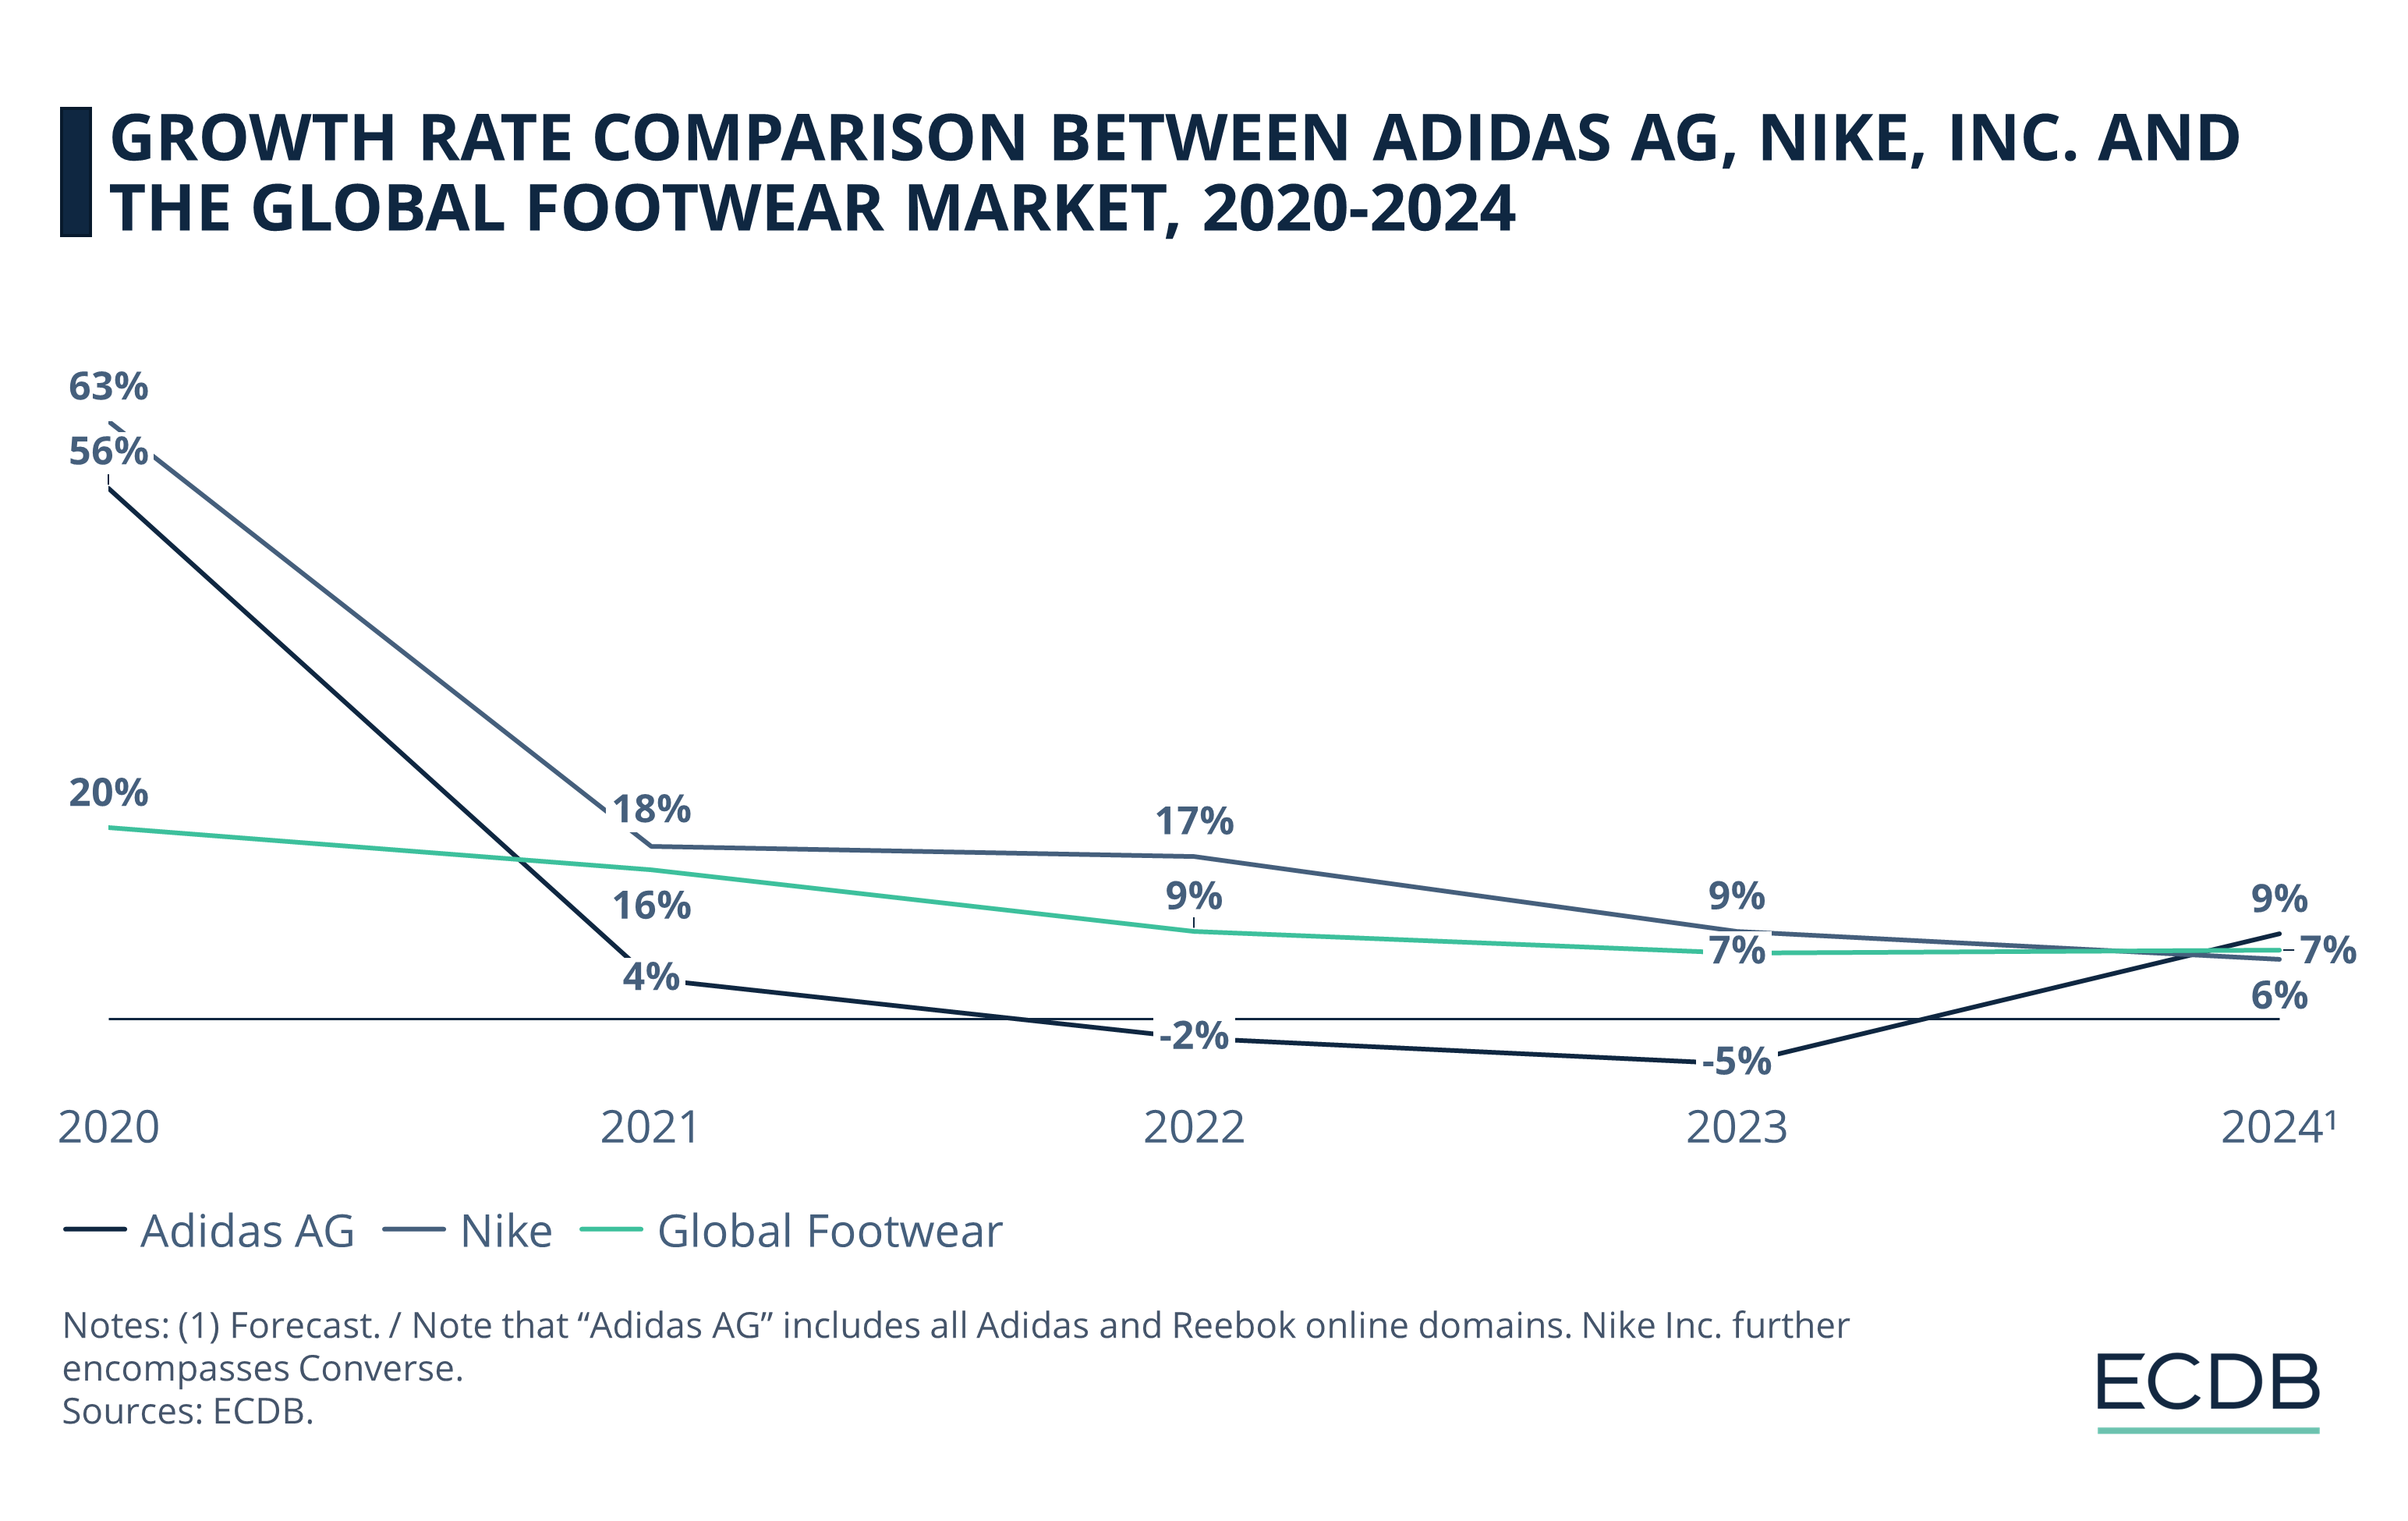 Growth Rate Comparison Between Adidas AG, Nike, Inc. and the Global Footwear Market, 2020-2024